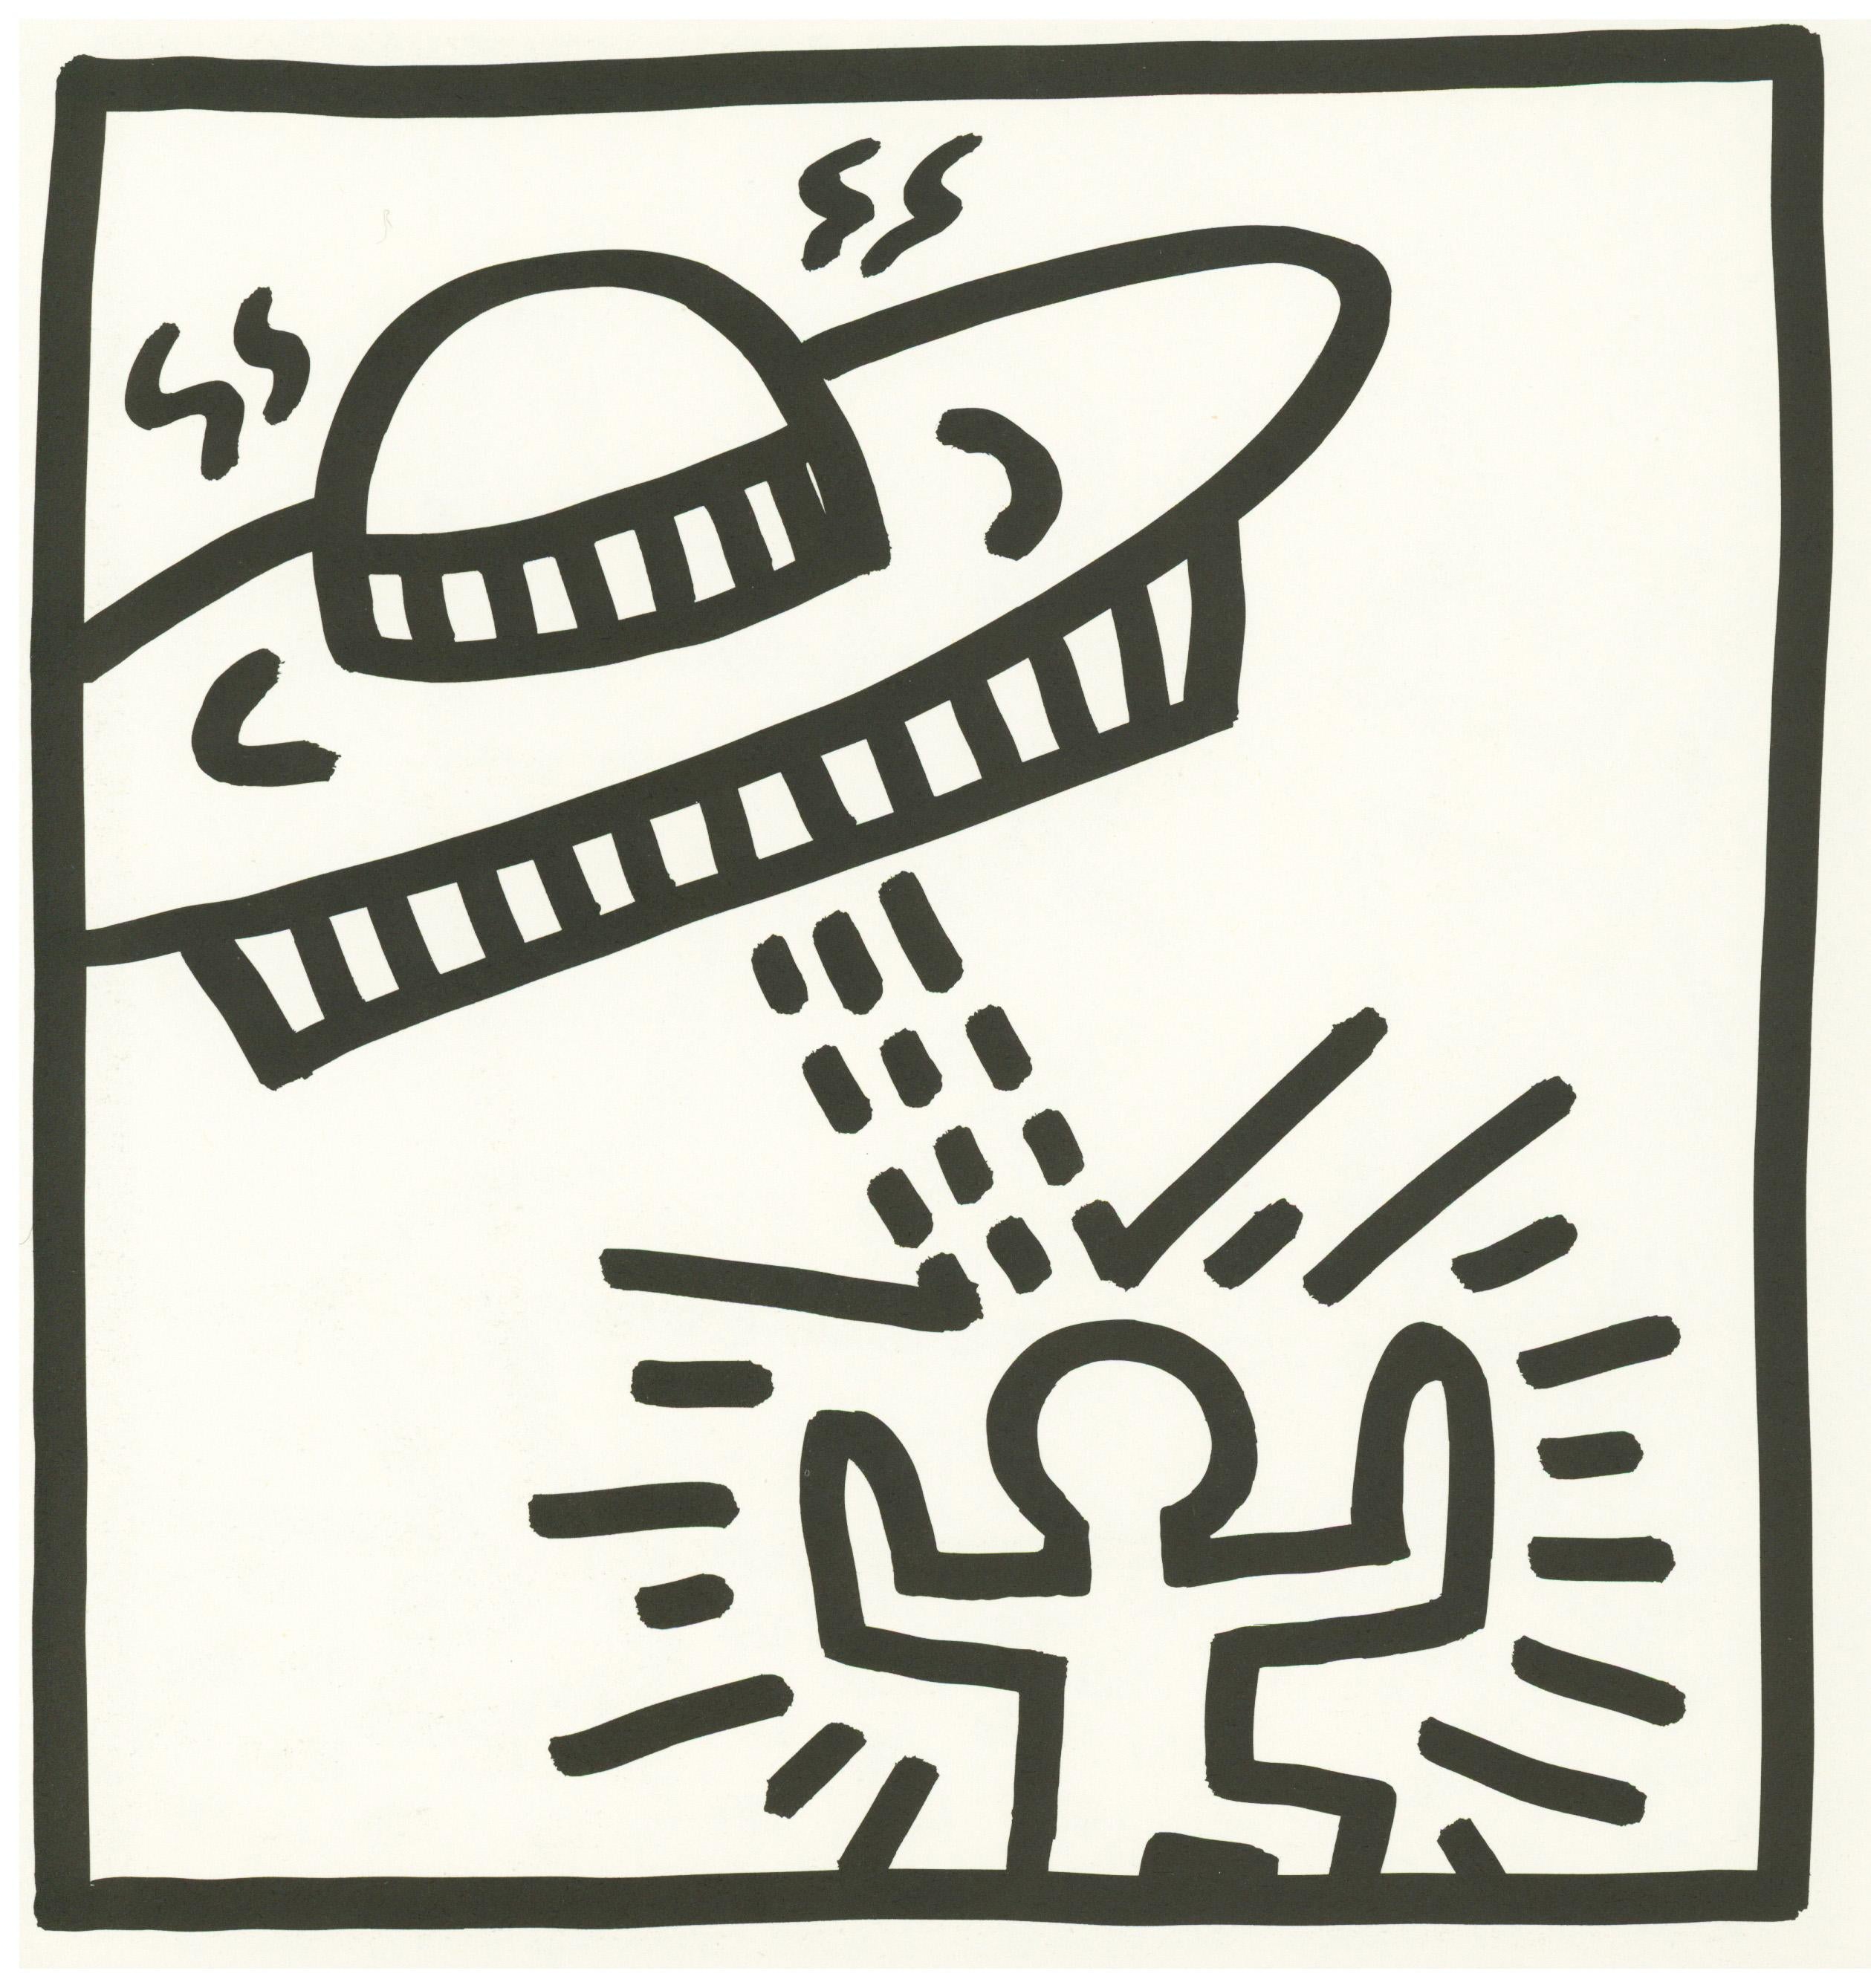 (after) Keith Haring Figurative Print - Keith Haring (untitled) spaceship lithograph 1982 (Haring prints) 